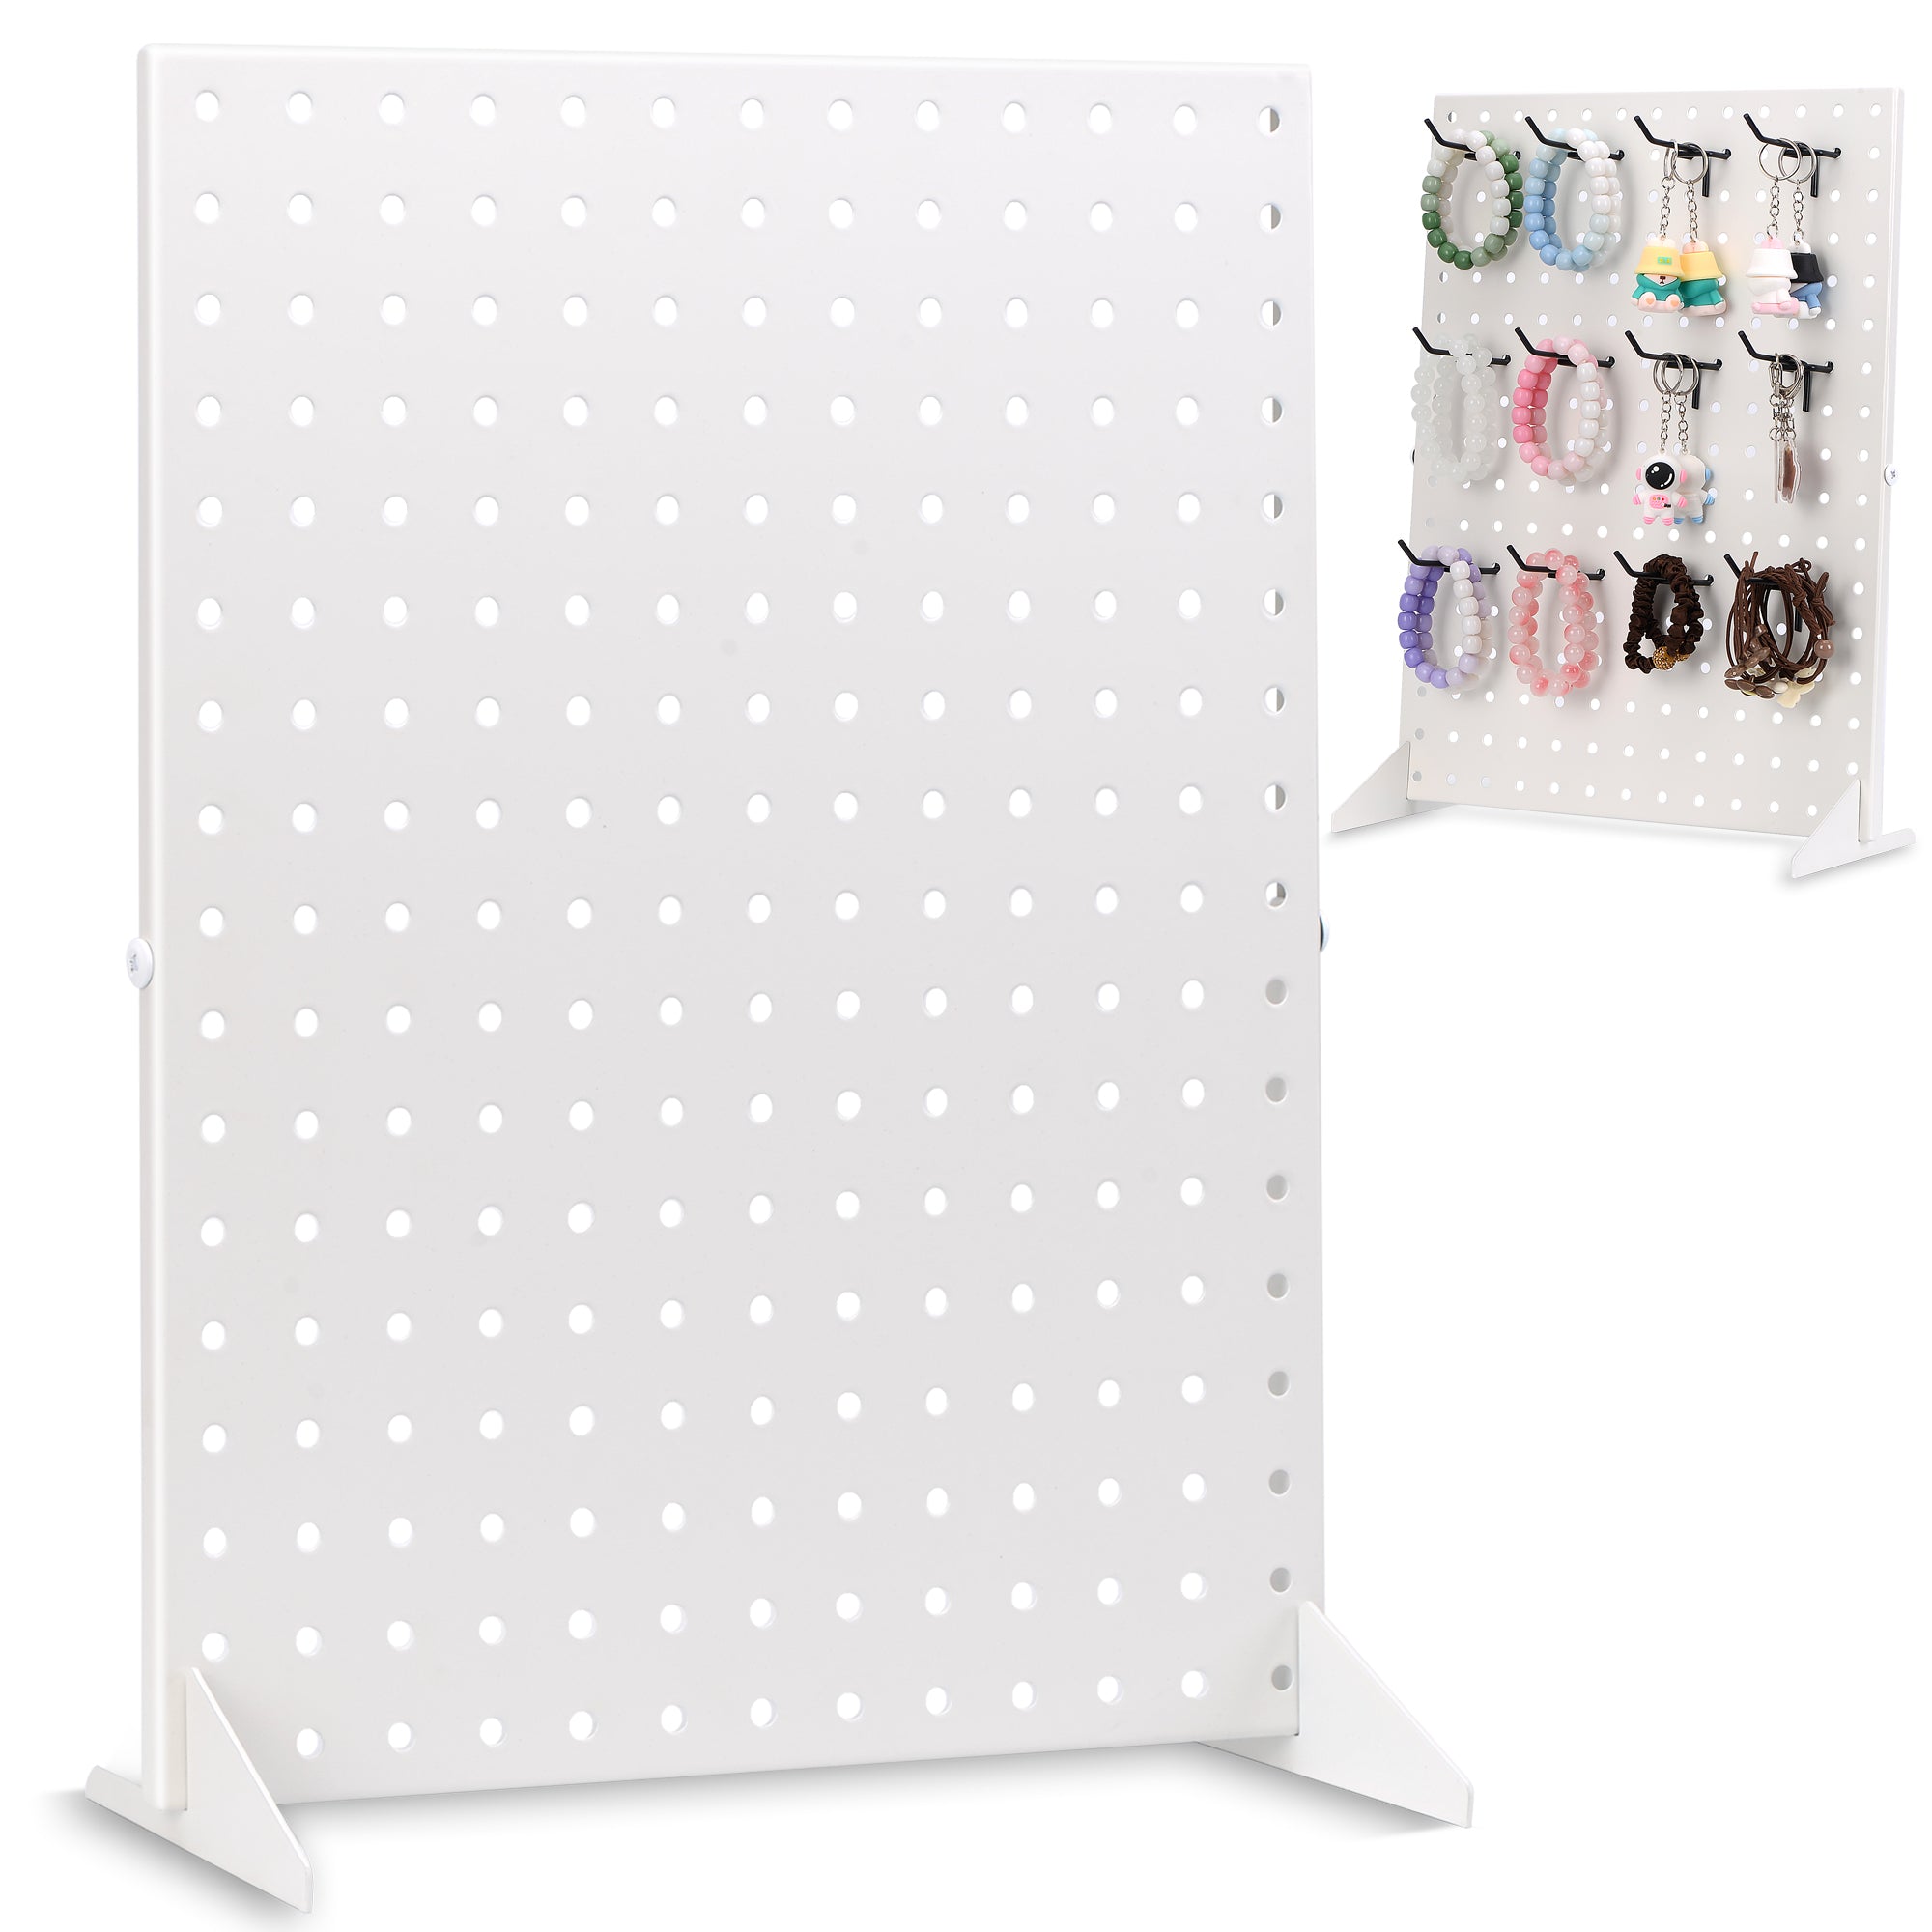 Pegboard Display Stand for Craft Shows & Fairs - Metal Store Display for Selling Accessories, Earring, Jewelry, Pin Display Stands for Retail Stores, Vendors & Events - 17" x 13” Designer White